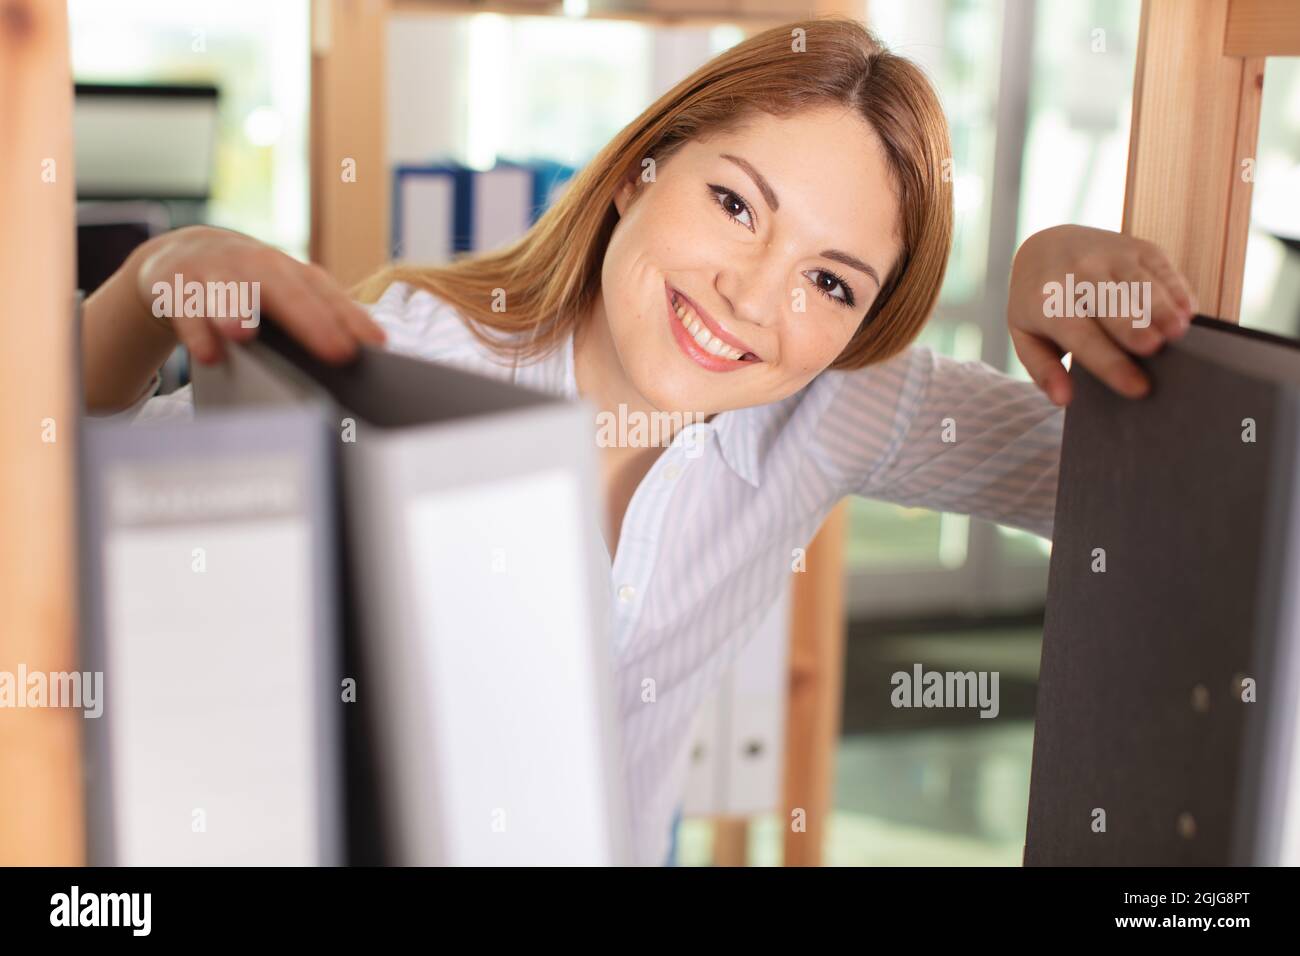 happy woman in office standing with folders Stock Photo